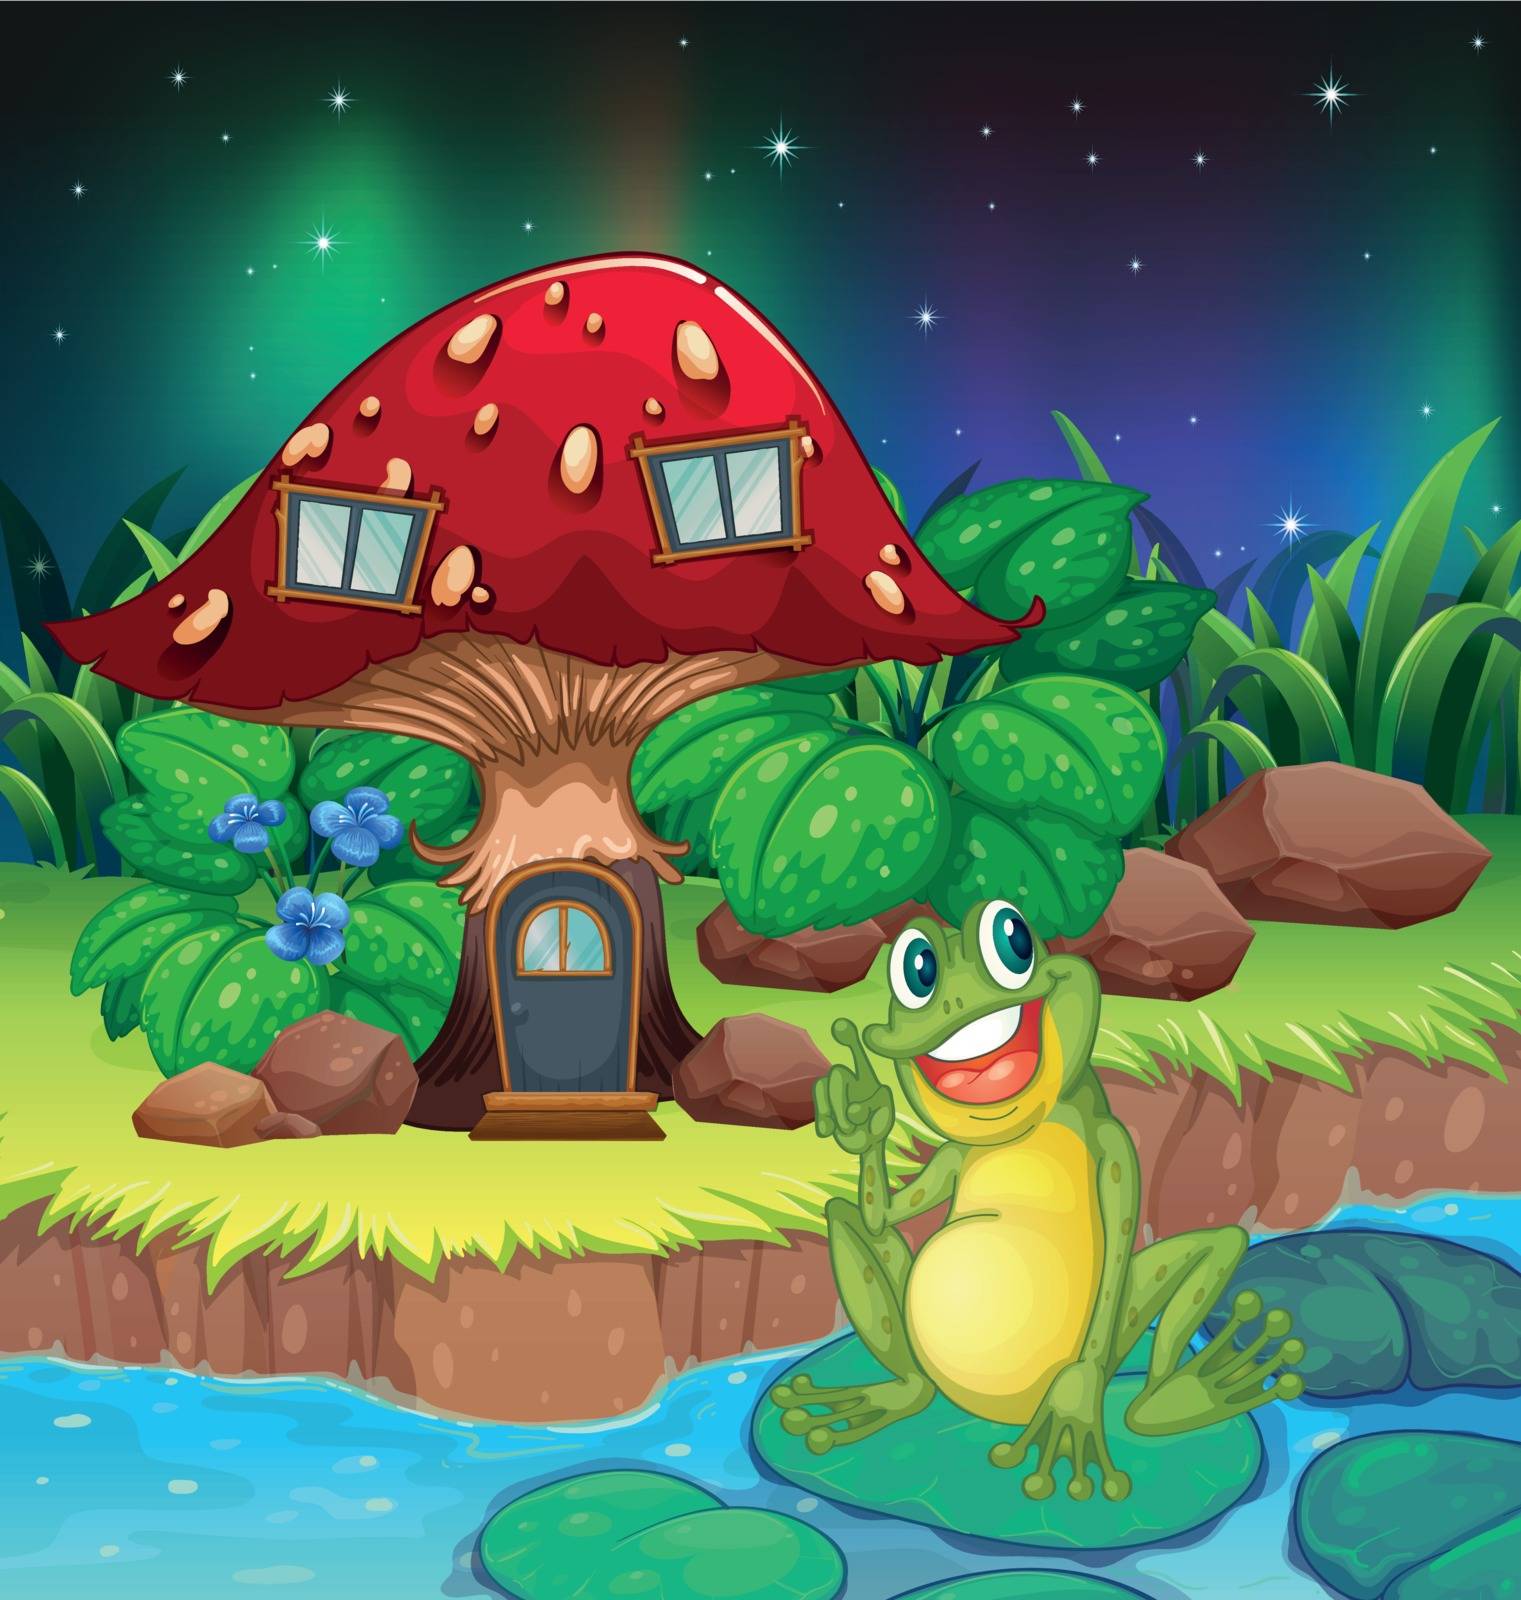 Illustration of a frog sitting on a waterlily near the mushroom house